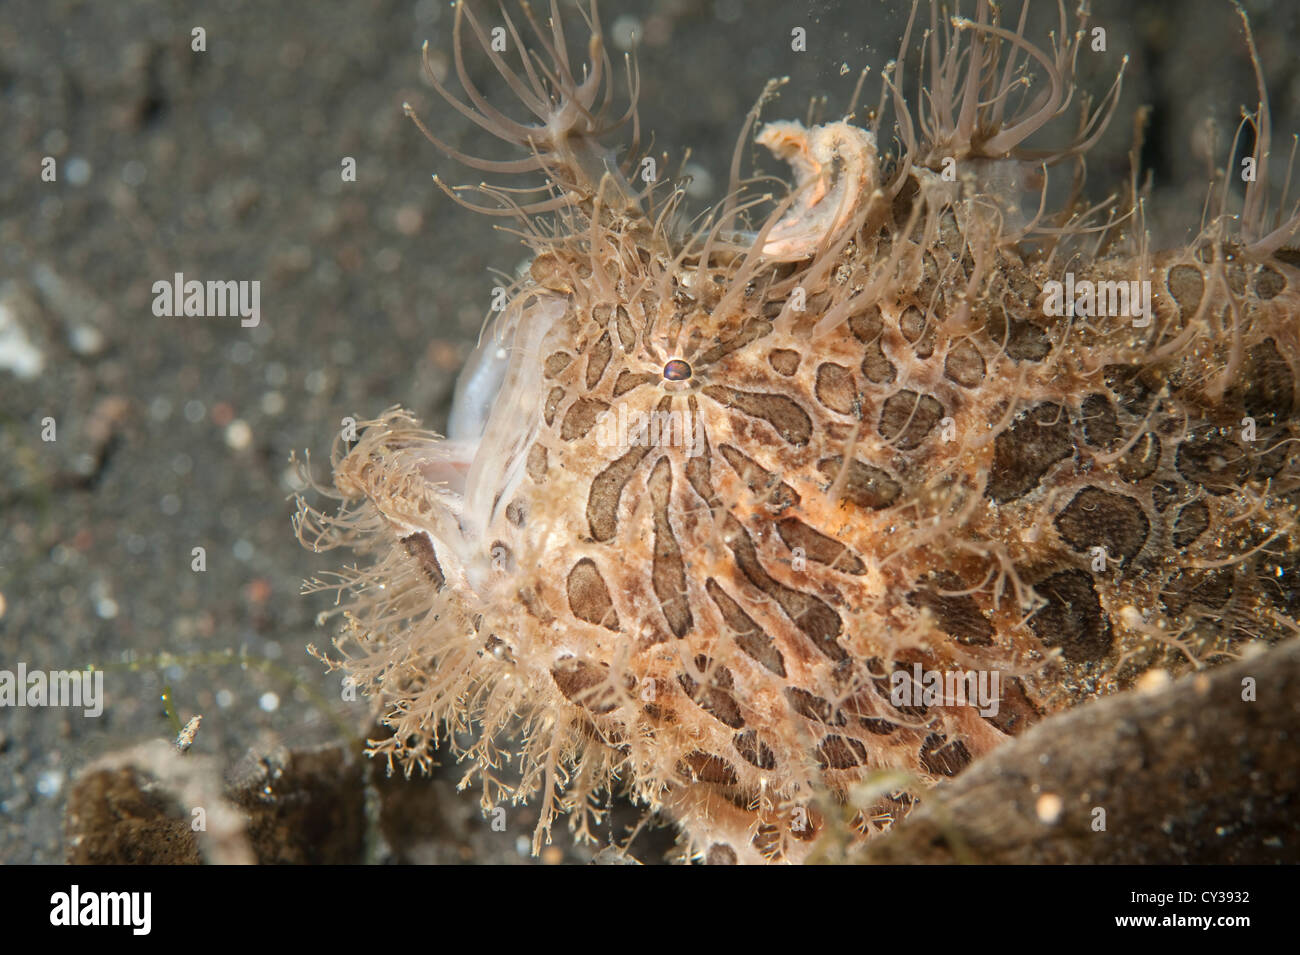 A Hairy Frogfish with an opened mouth and lure visible in Lembeh Strait, North Sulawesi. Stock Photo